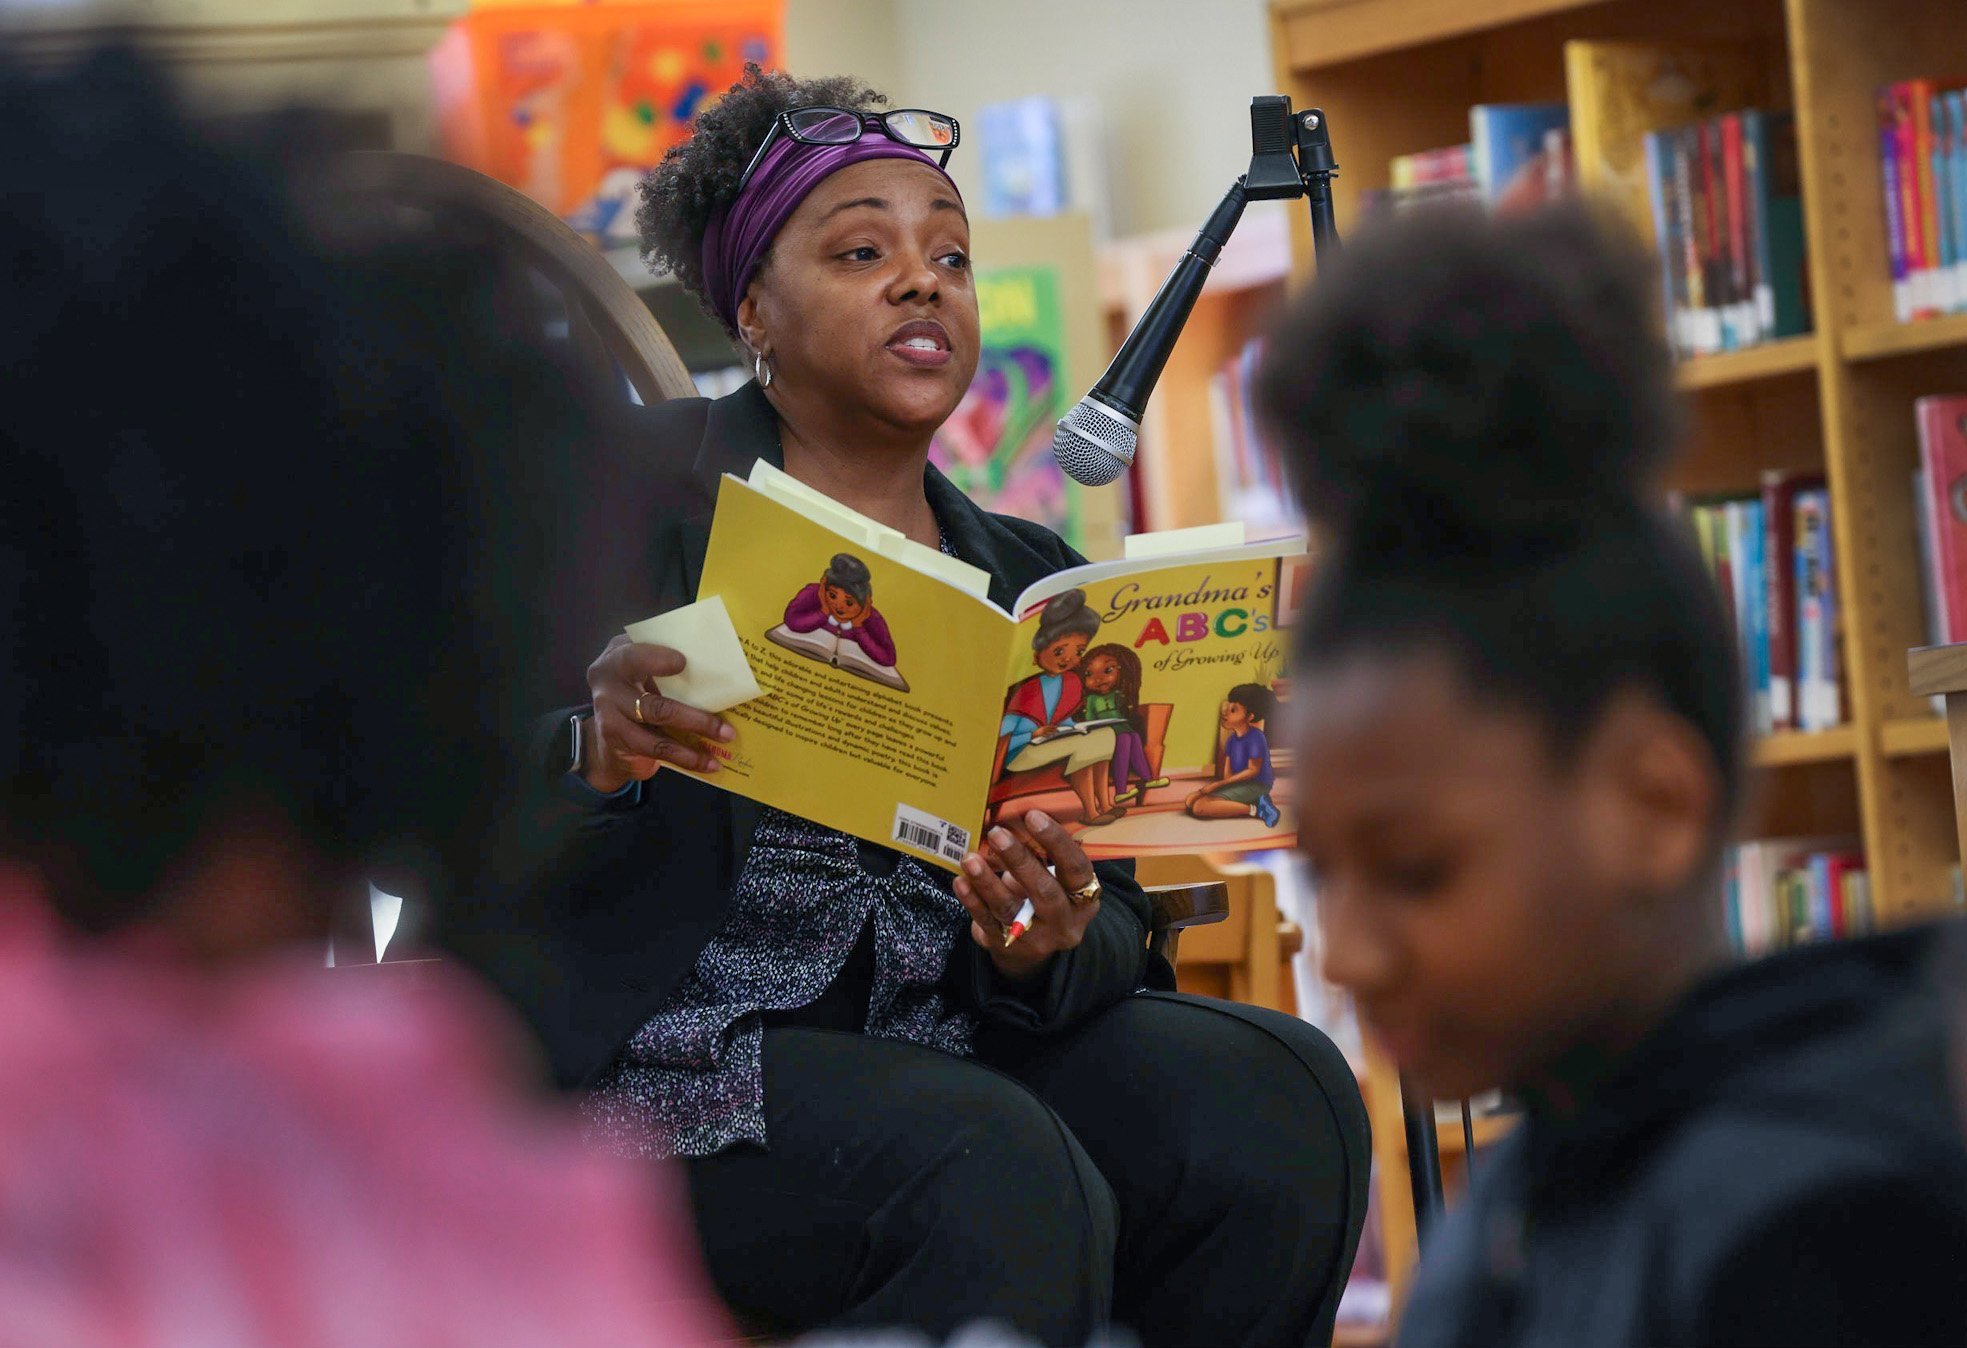  Author Denise Bailey read her new children’s book Grandma’s ABCs of Growing Up at the McKeesport Library’s Black History Month Celebration.   Photograph by Comocrea Johnson  